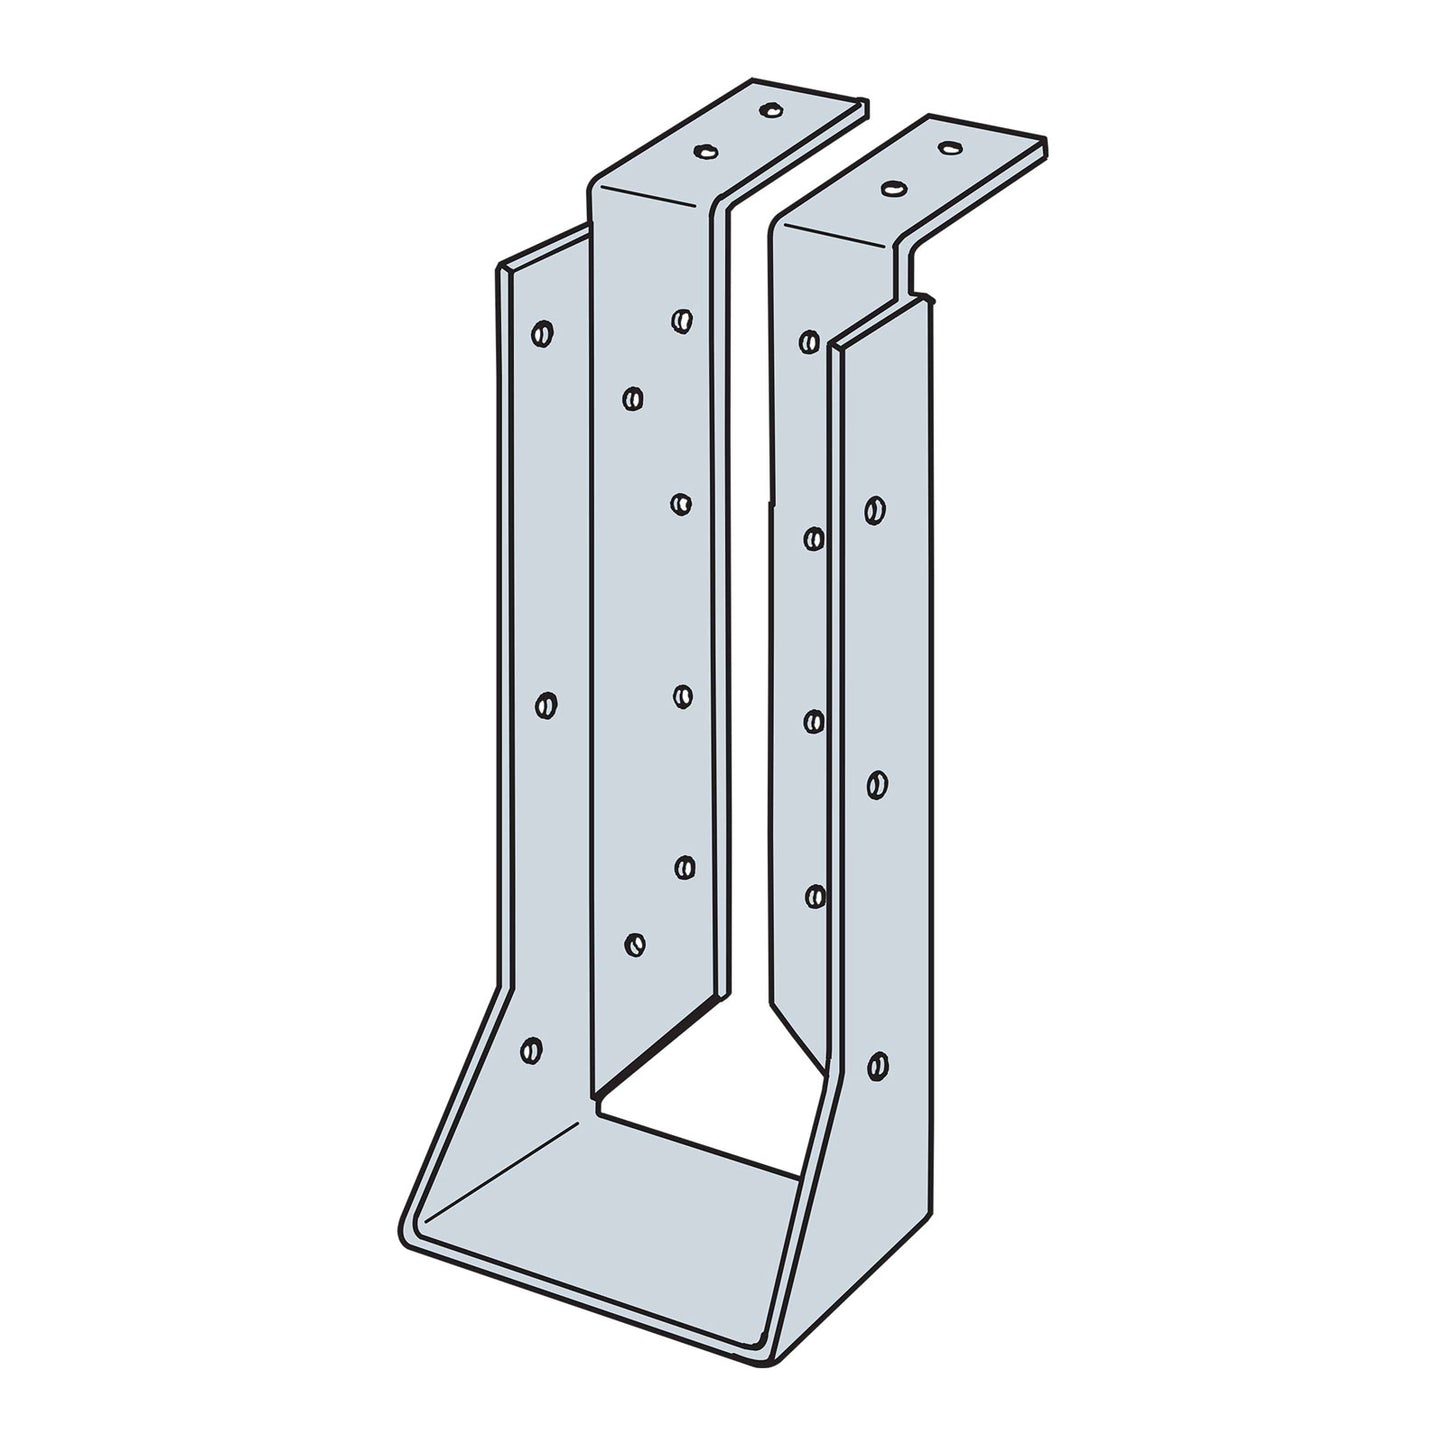 Simpson HUC312TF Heavy Top-Flange Hanger with Concealed Flanges - G90 Galvanized